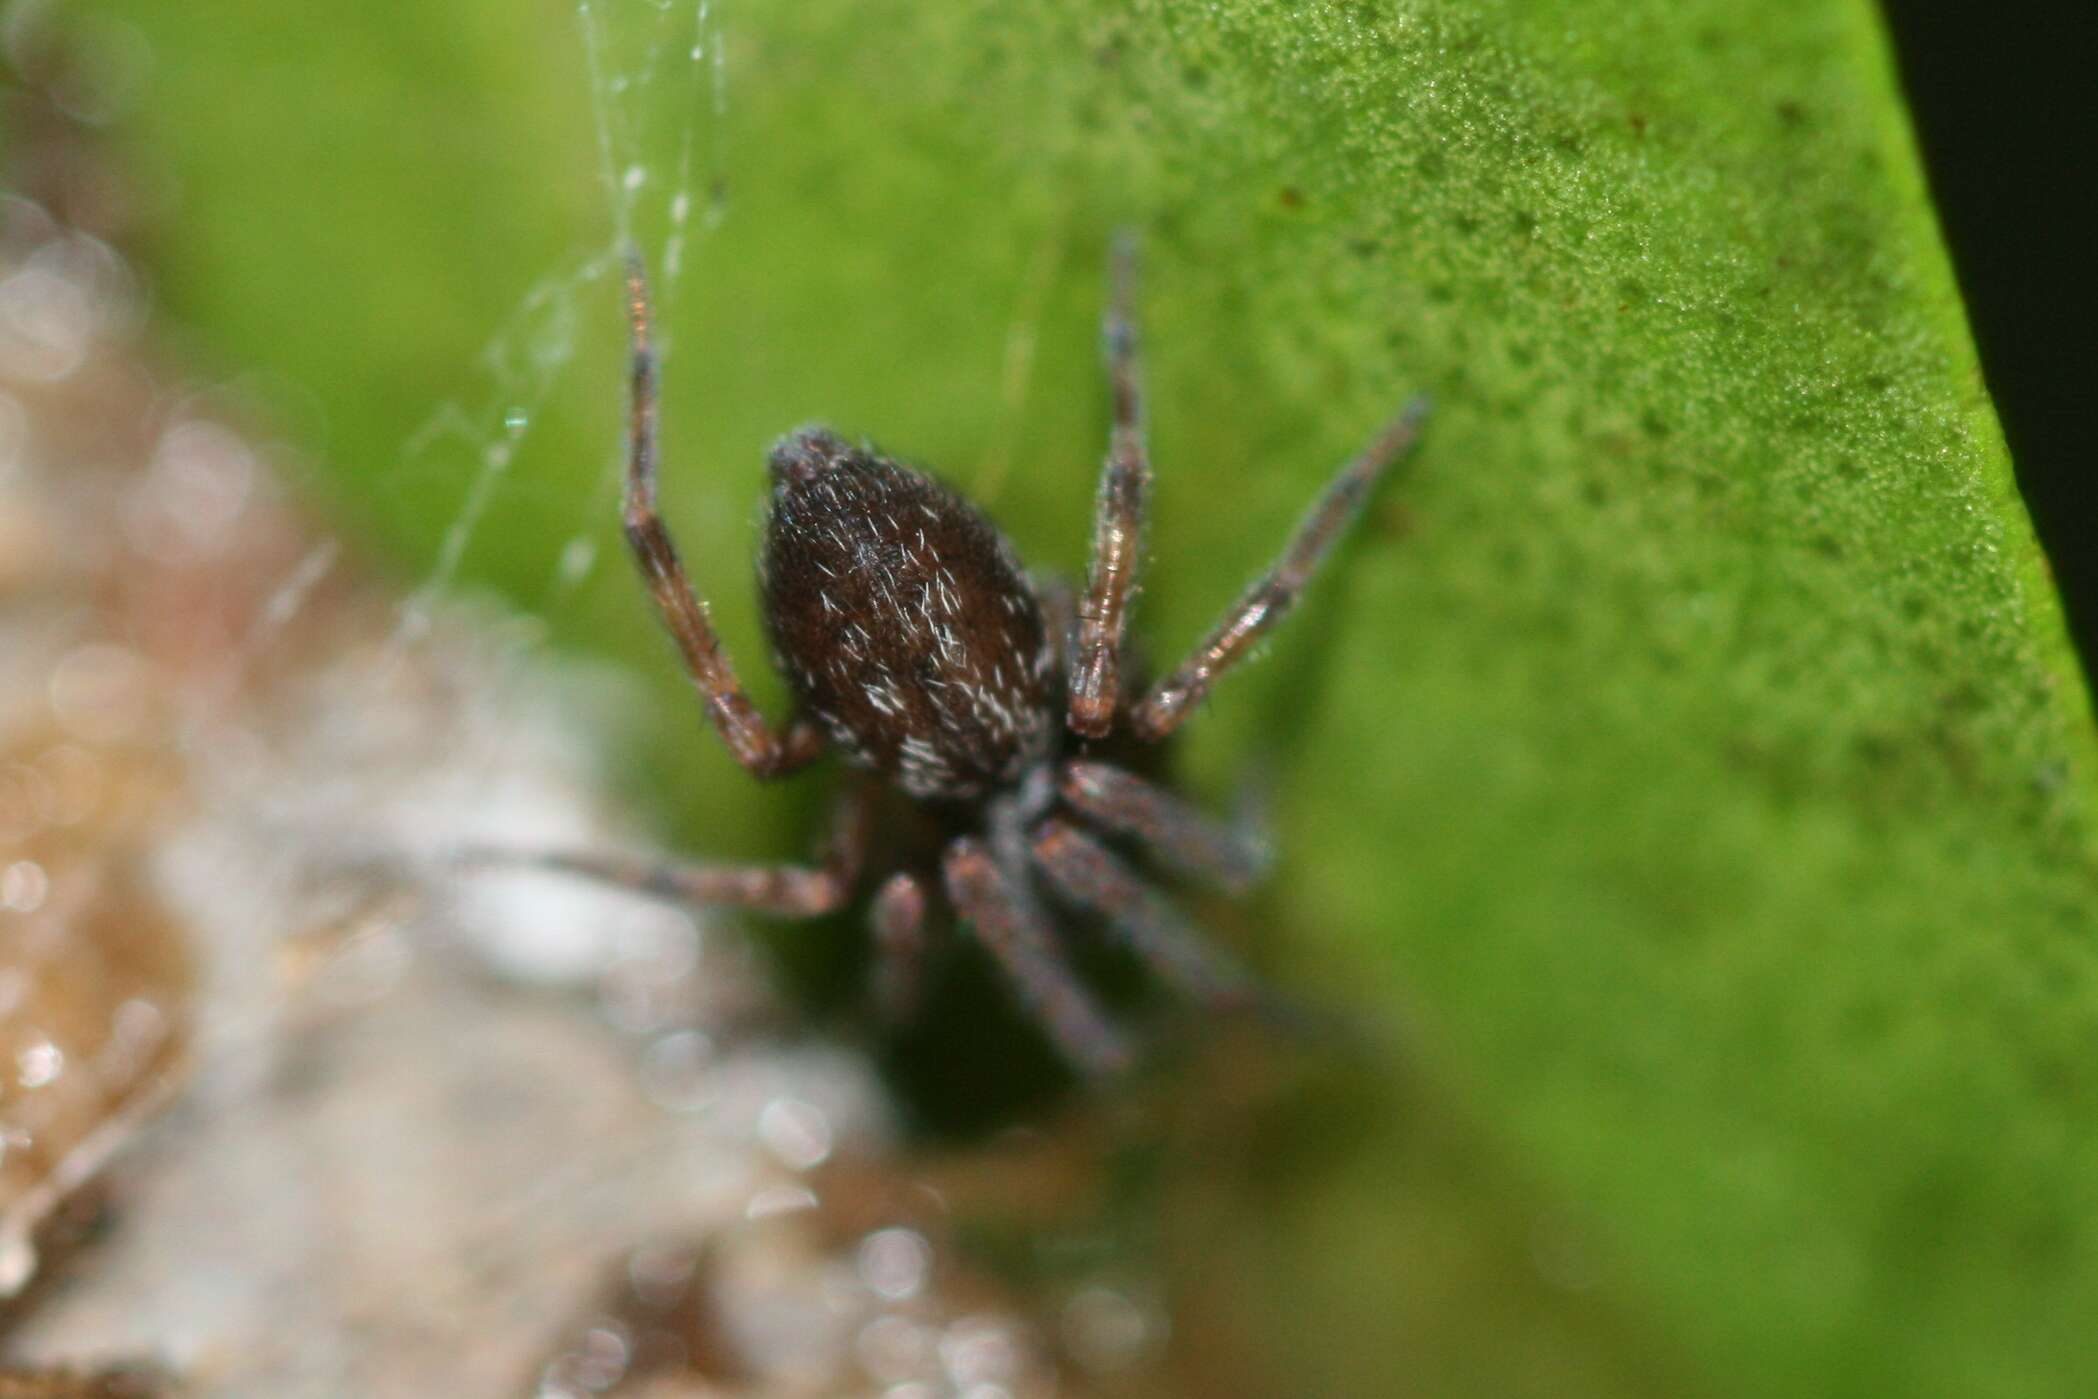 Image of desid spiders